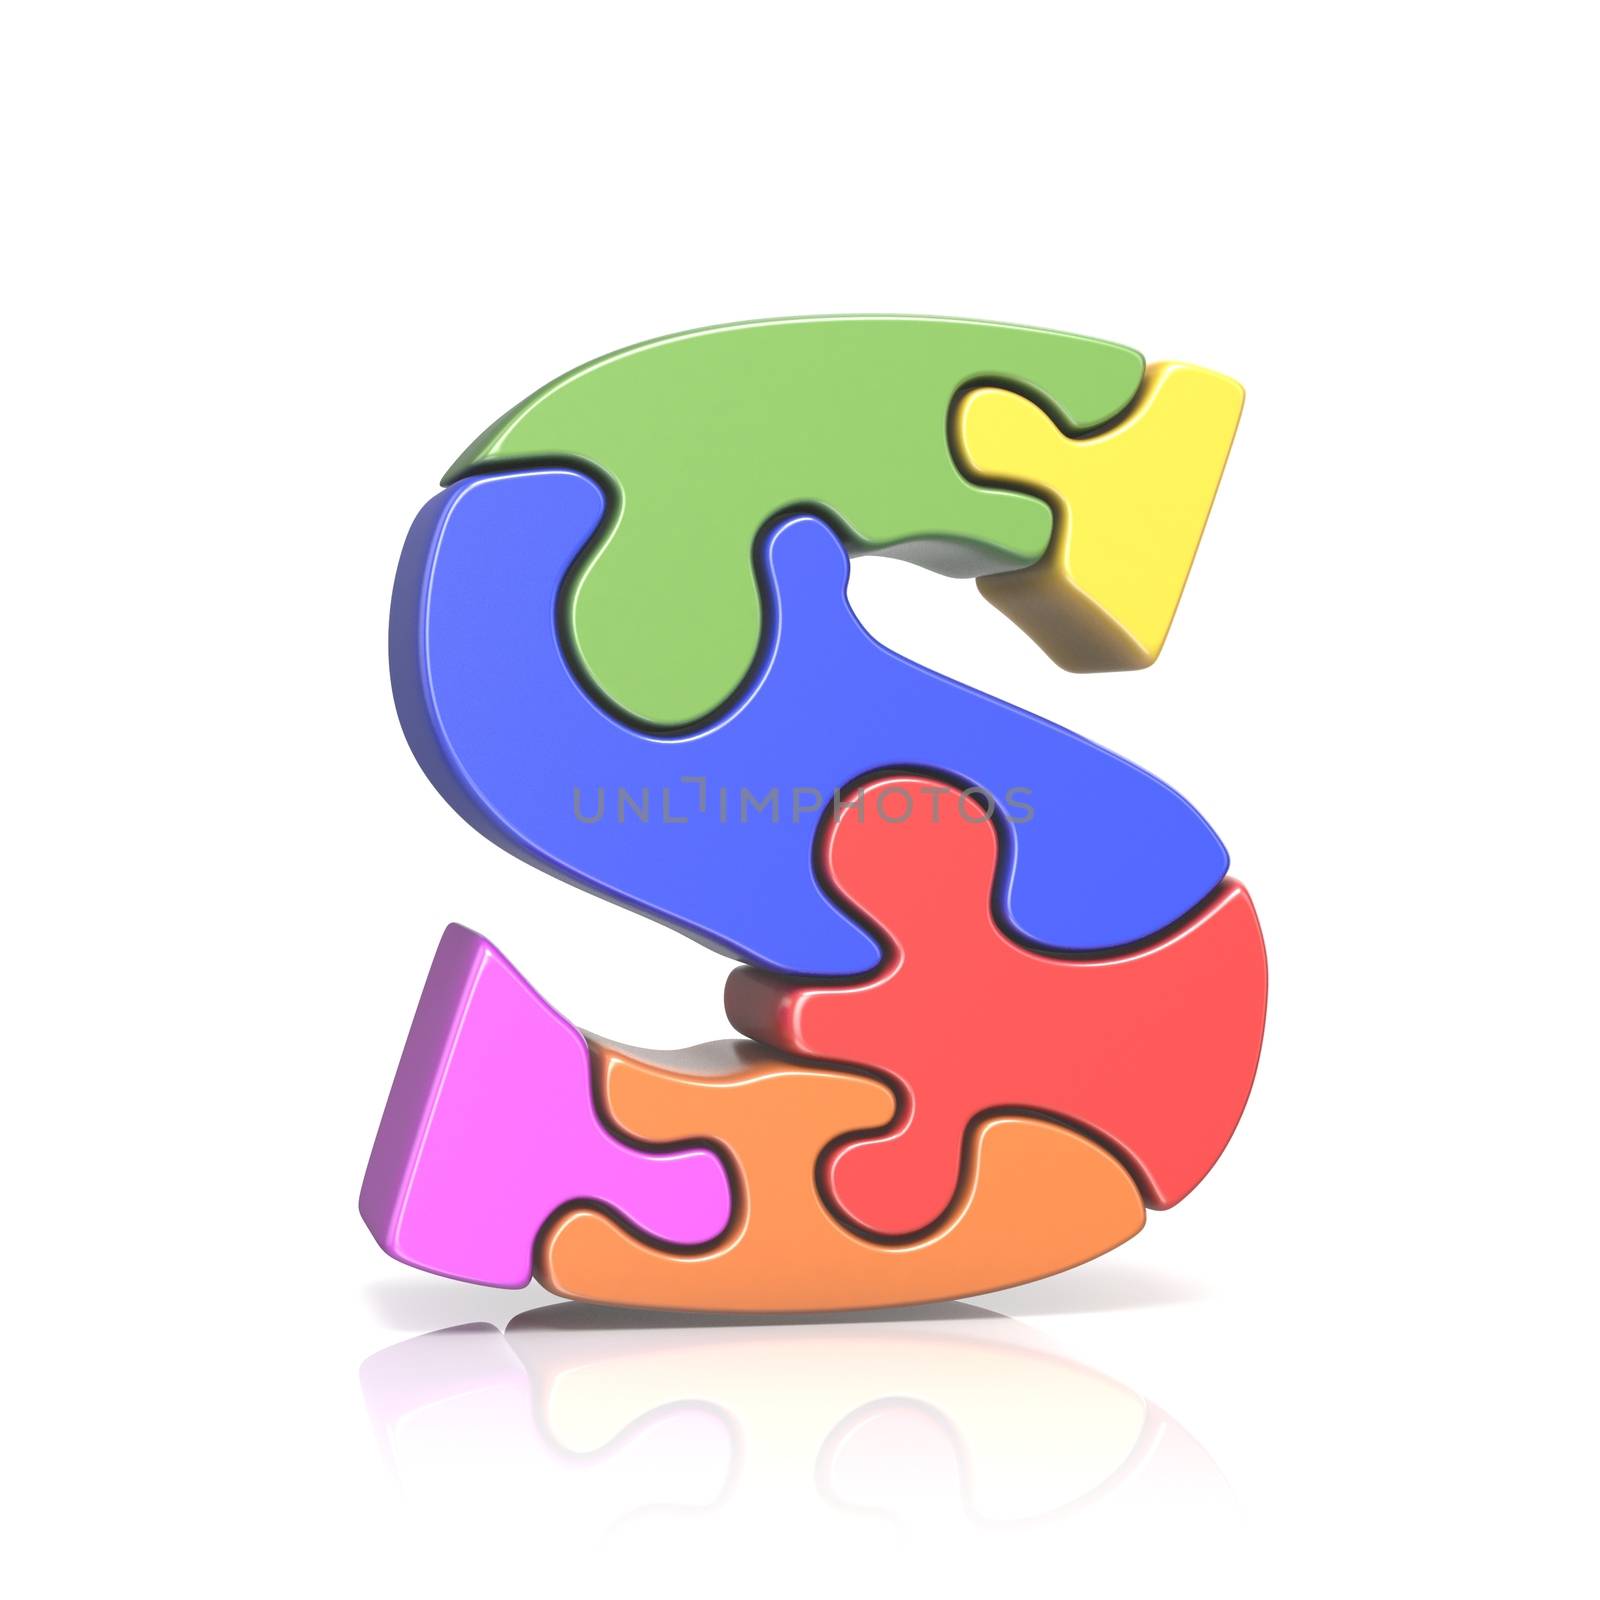 Puzzle jigsaw letter S 3D by djmilic